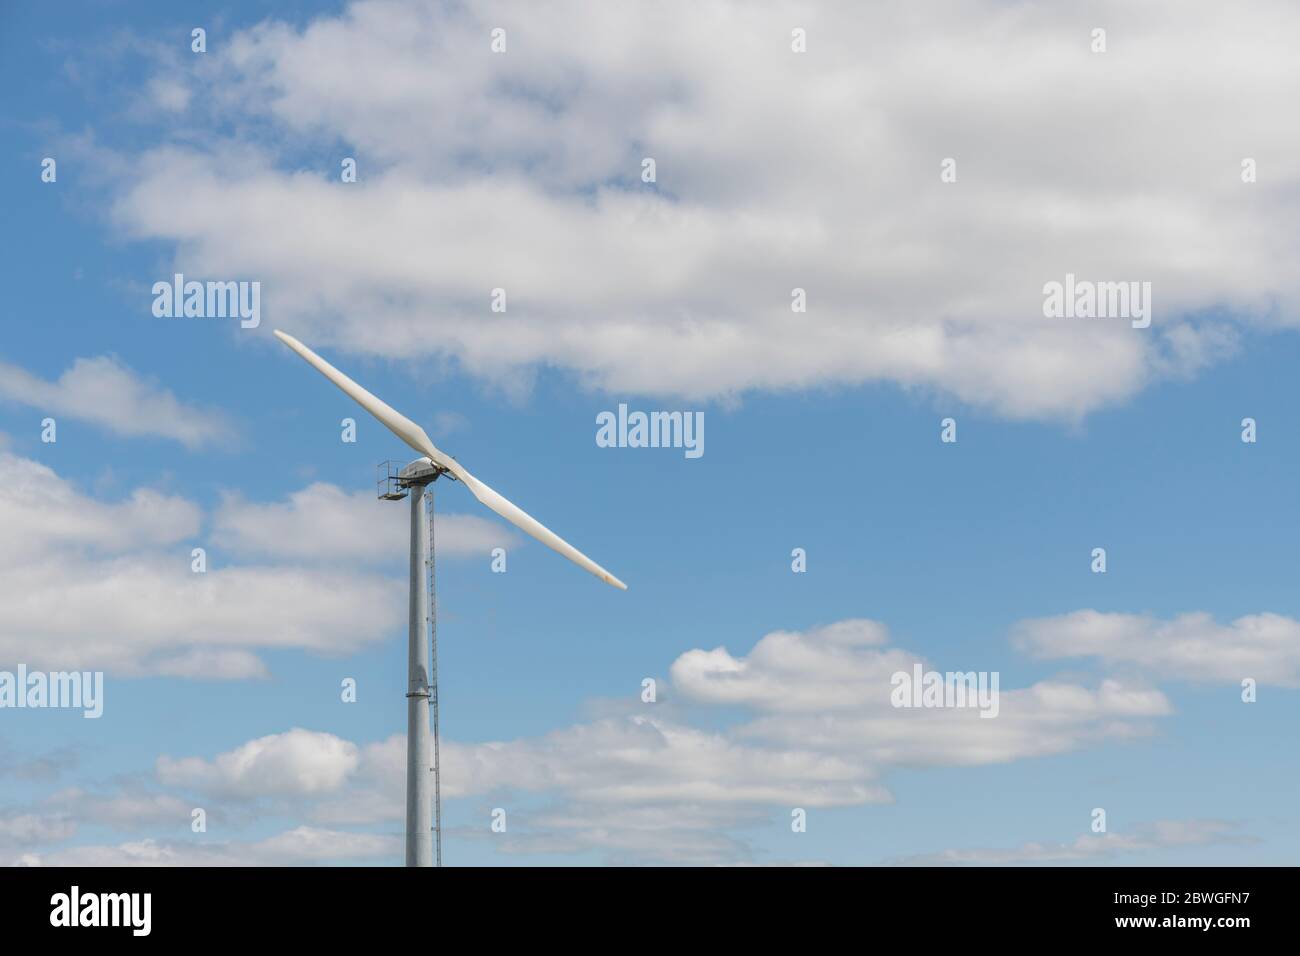 Smallish, field-based, wind turbine / wind generator and sunny blue summer sky with fluffy clouds. UK landscape with wind turbine clean power. Stock Photo